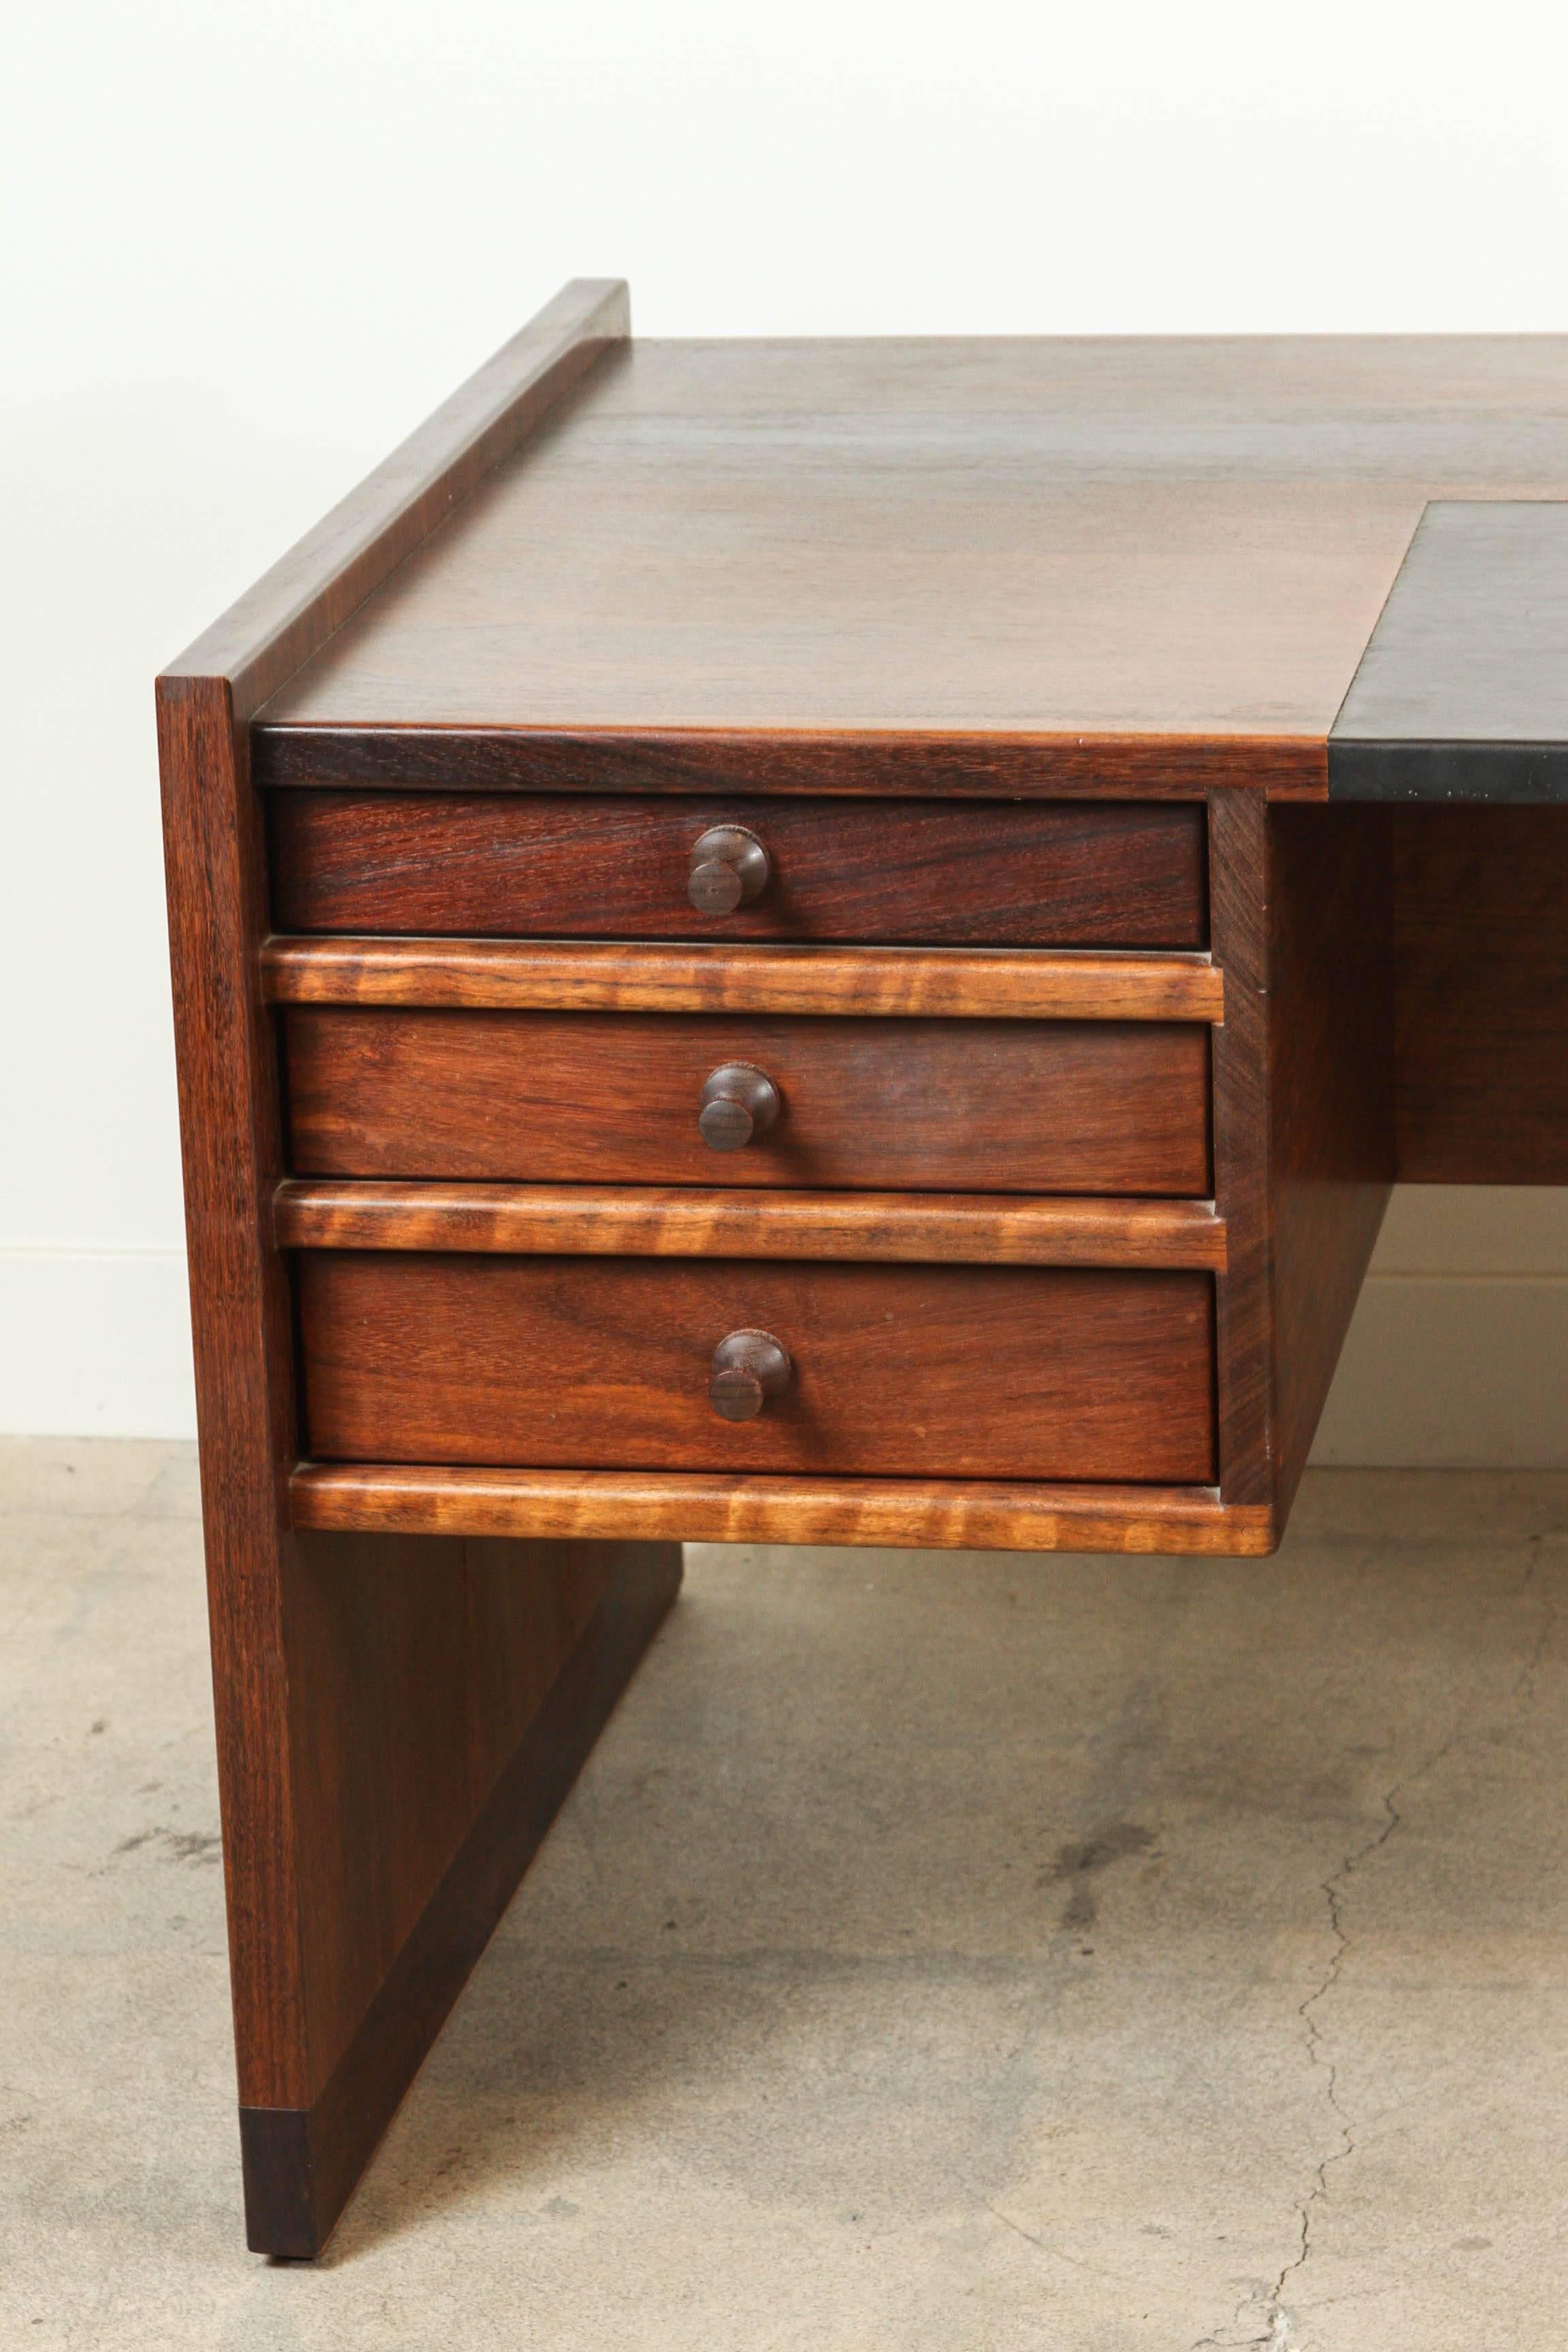 Solid walnut and leather desk by John Nyquist. Custom commissioned in 1965.